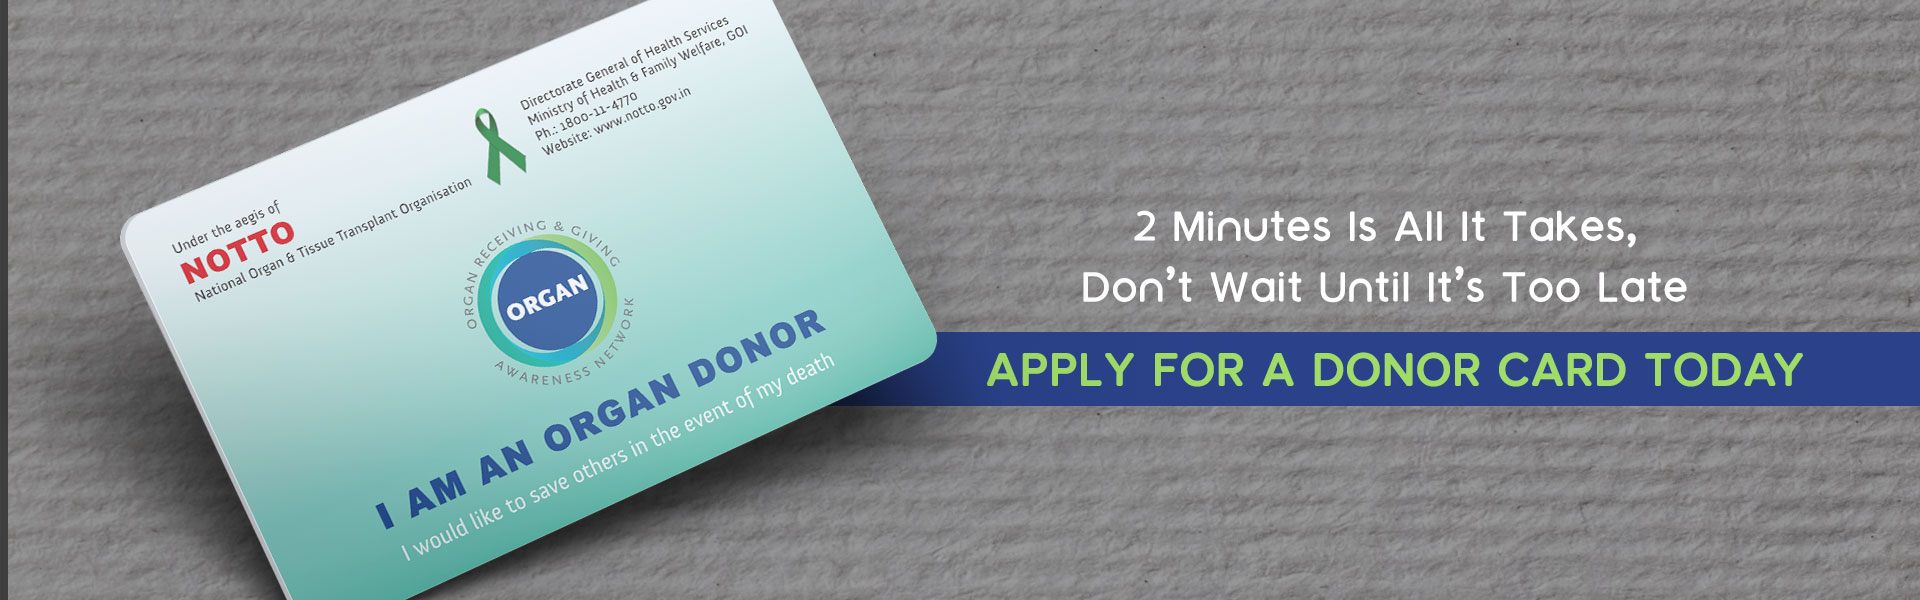 be an organ donor and claim your donor card